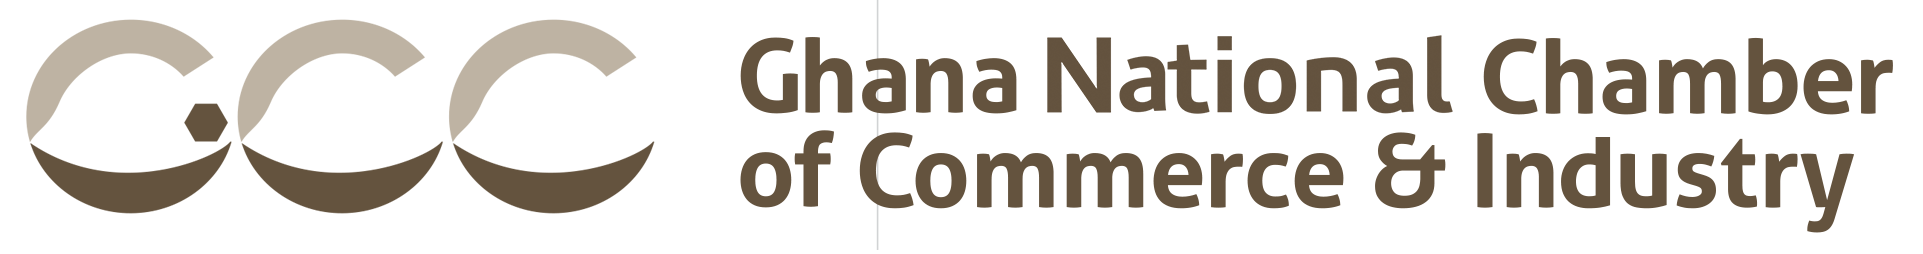 Ghana National Chamber of Commerce and Industry